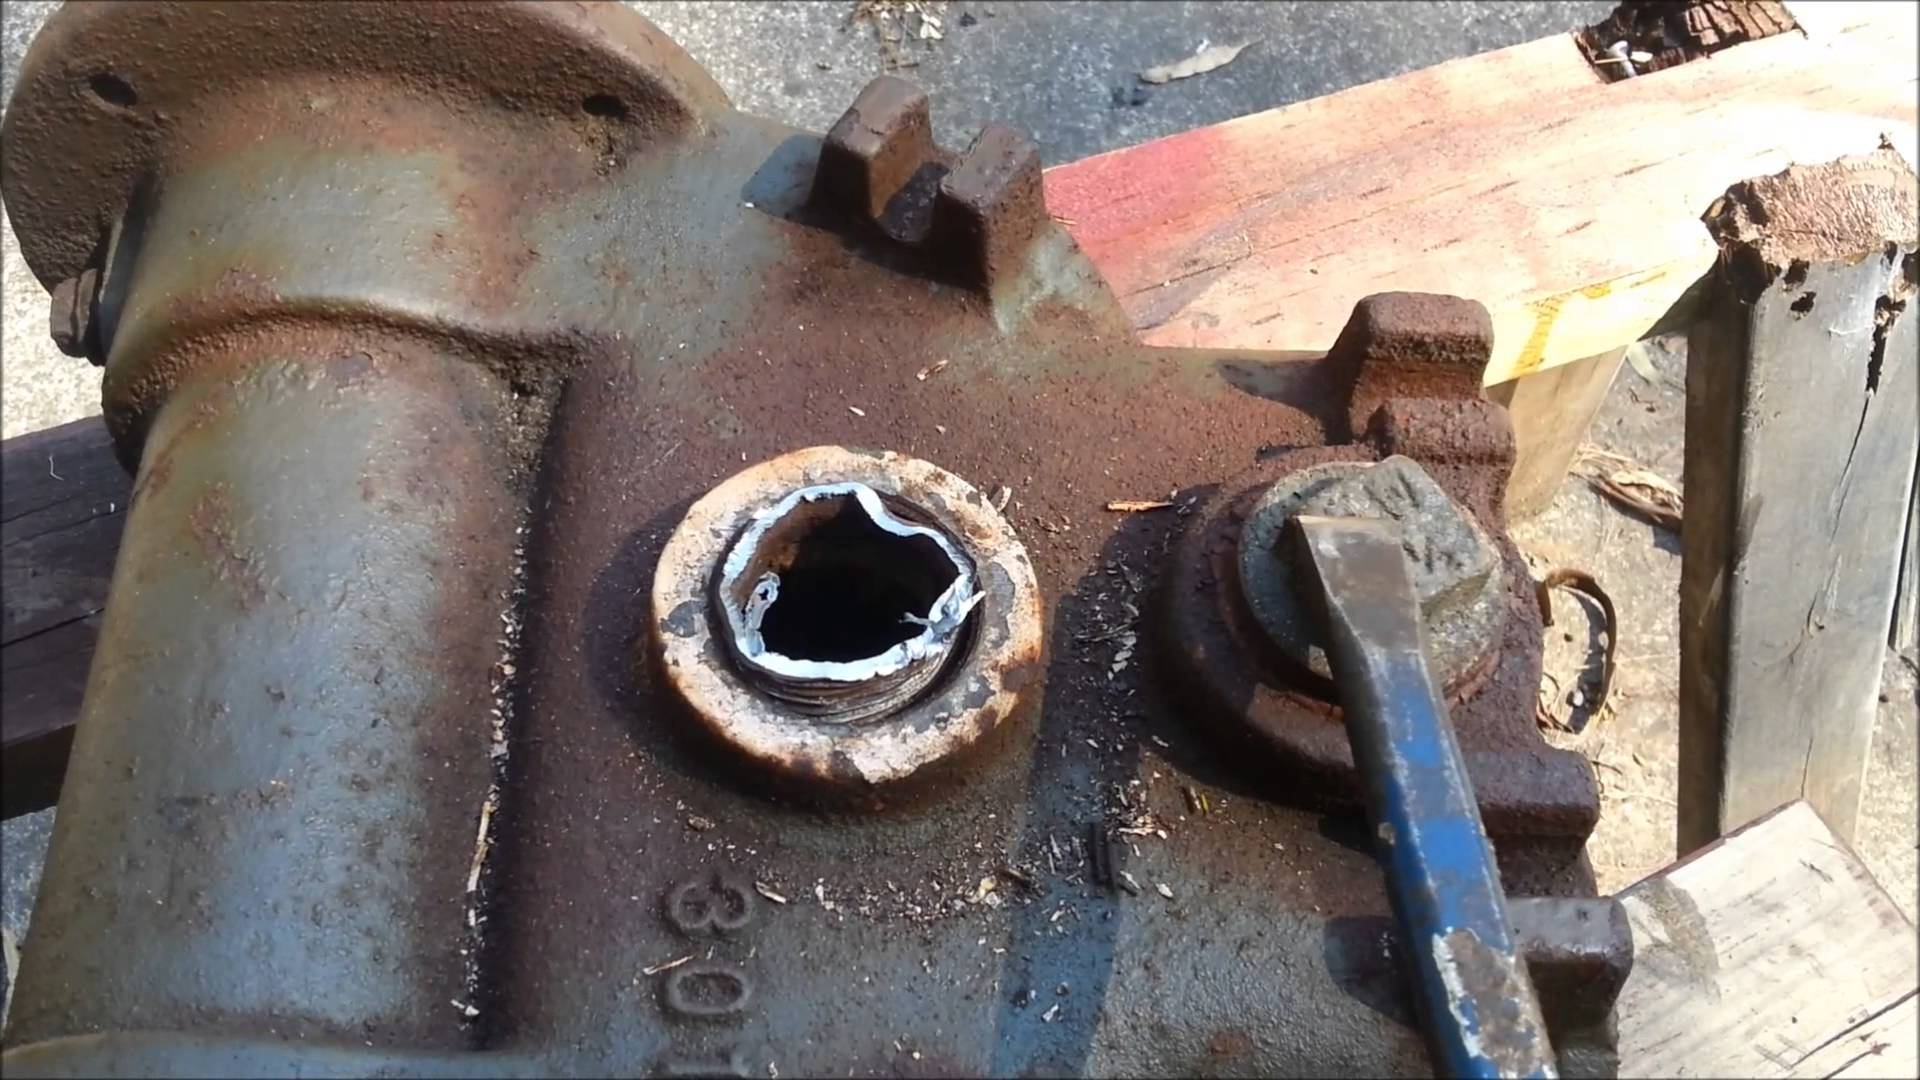 Rusty Pipe Removal from an Engine or Pump - YouTube